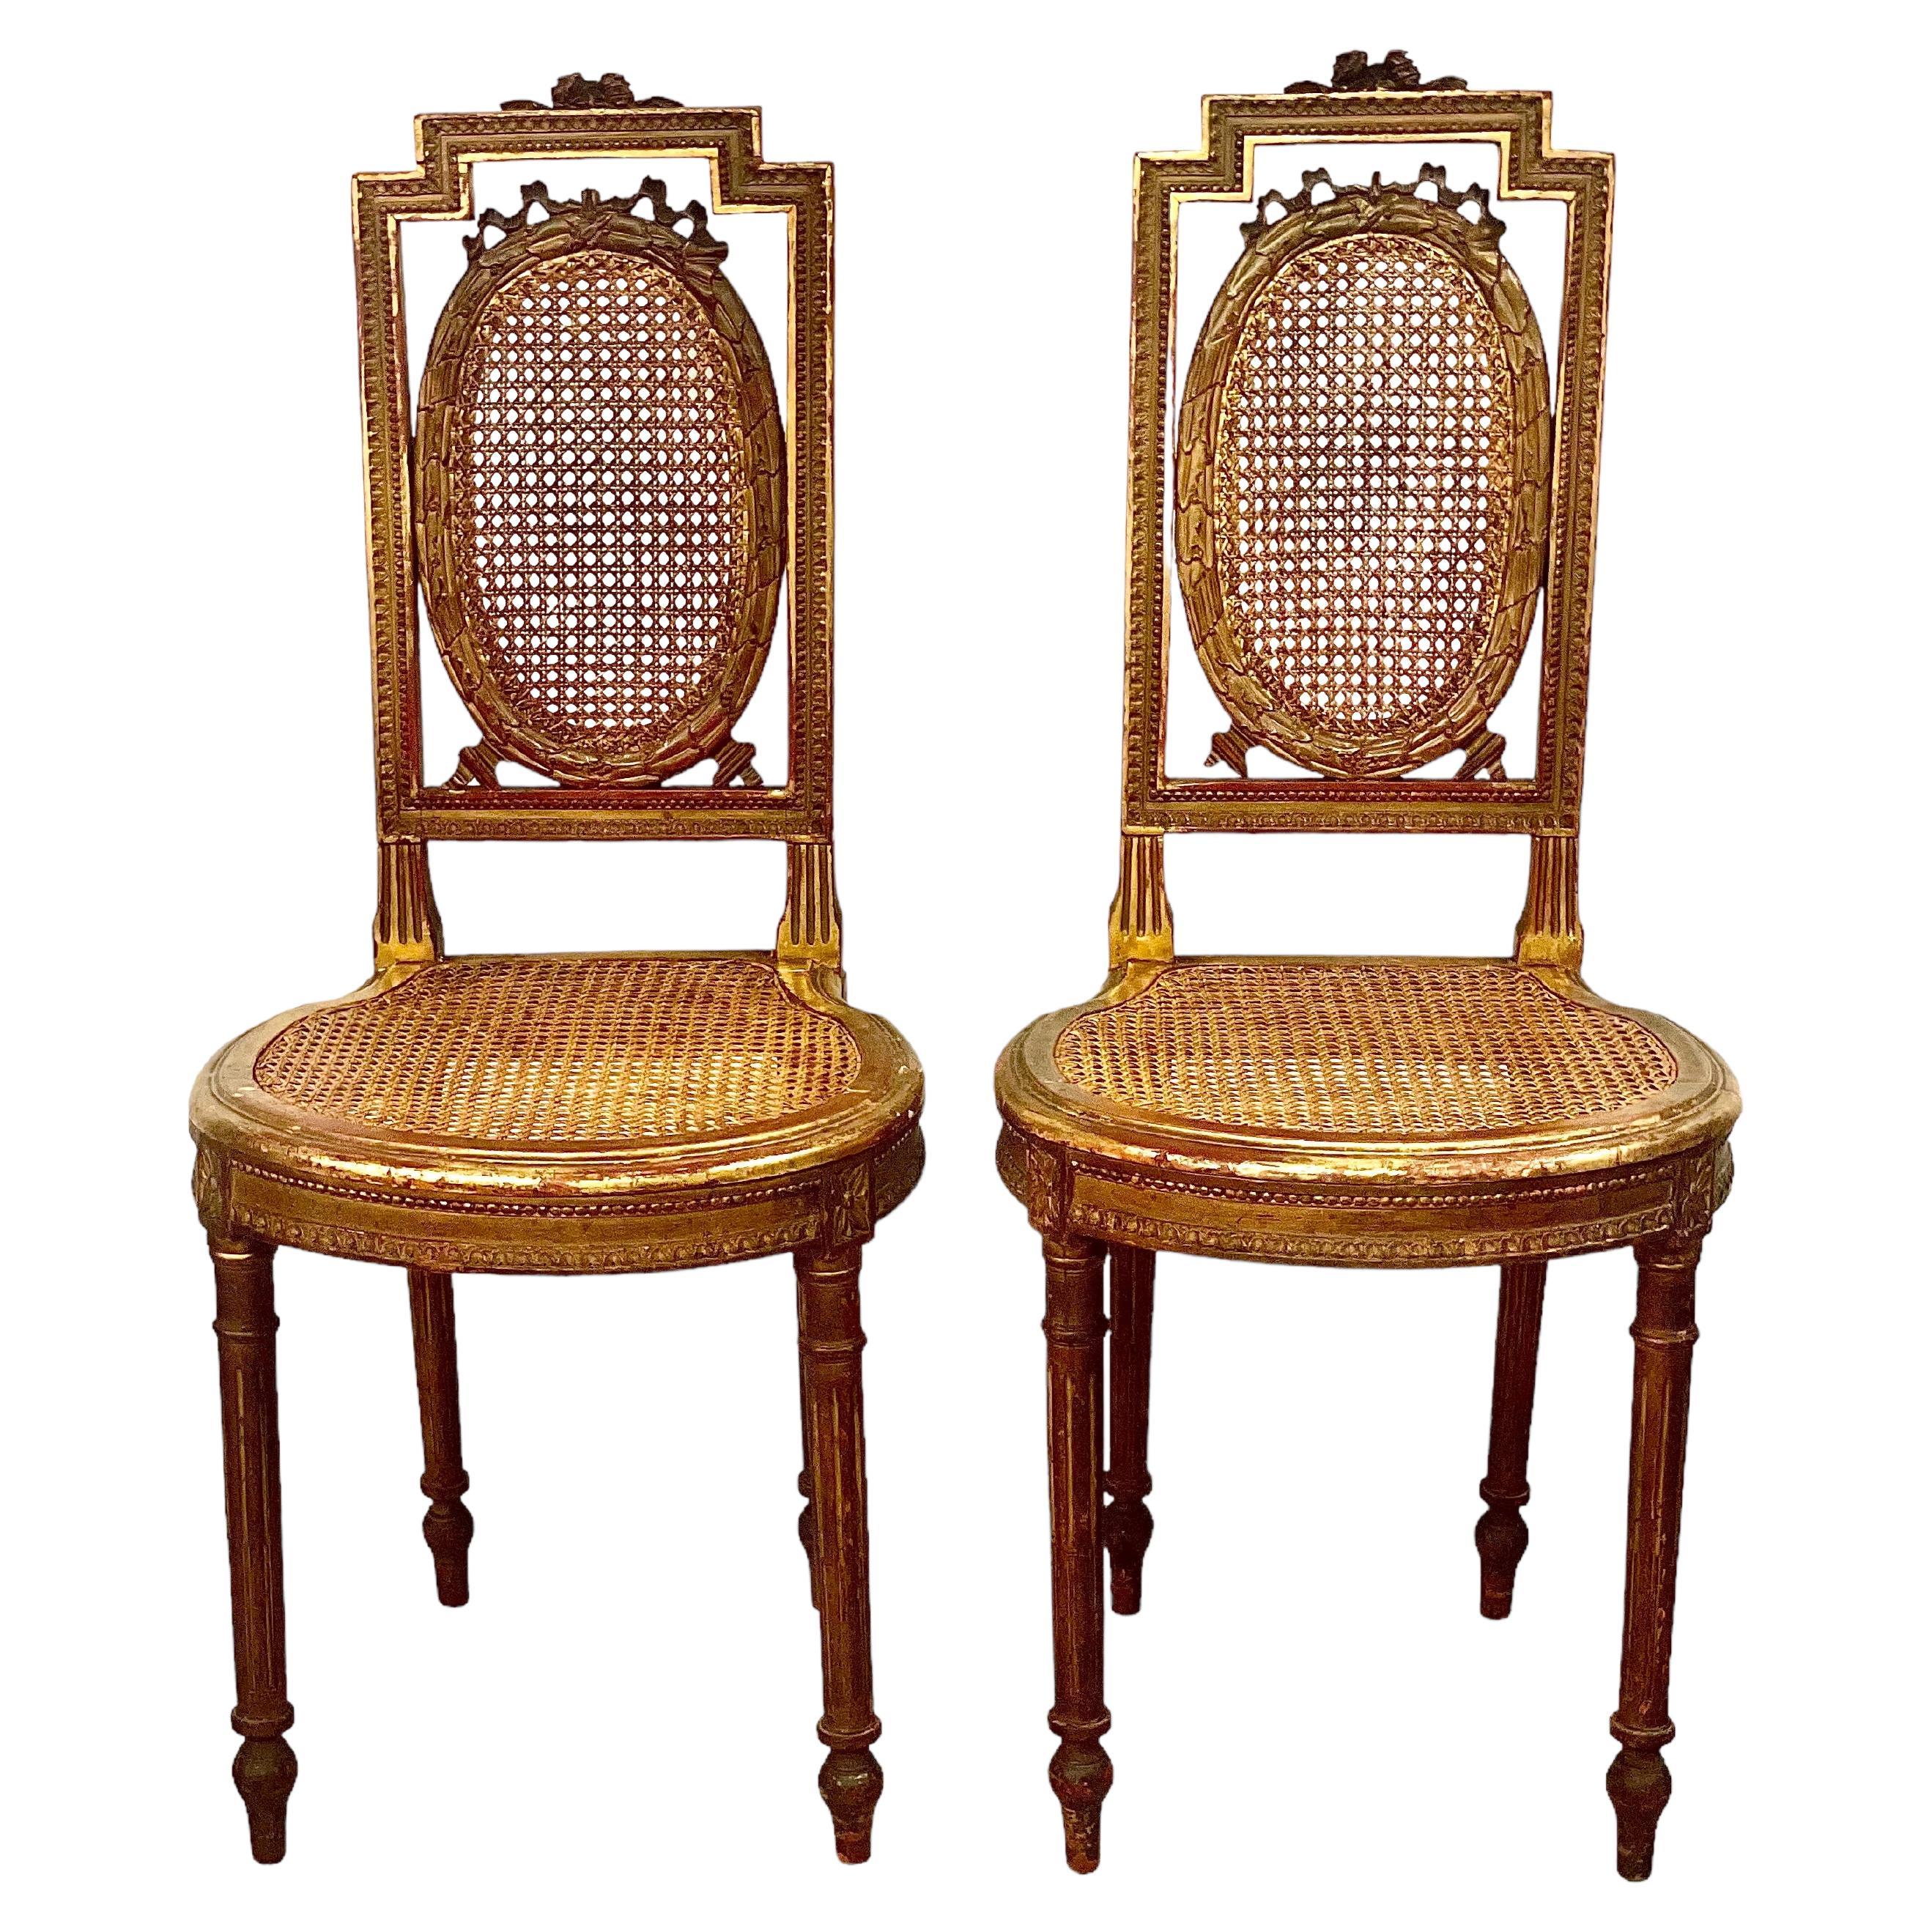 Pair of French Giltwood and Cane Side Chairs, 19th Century